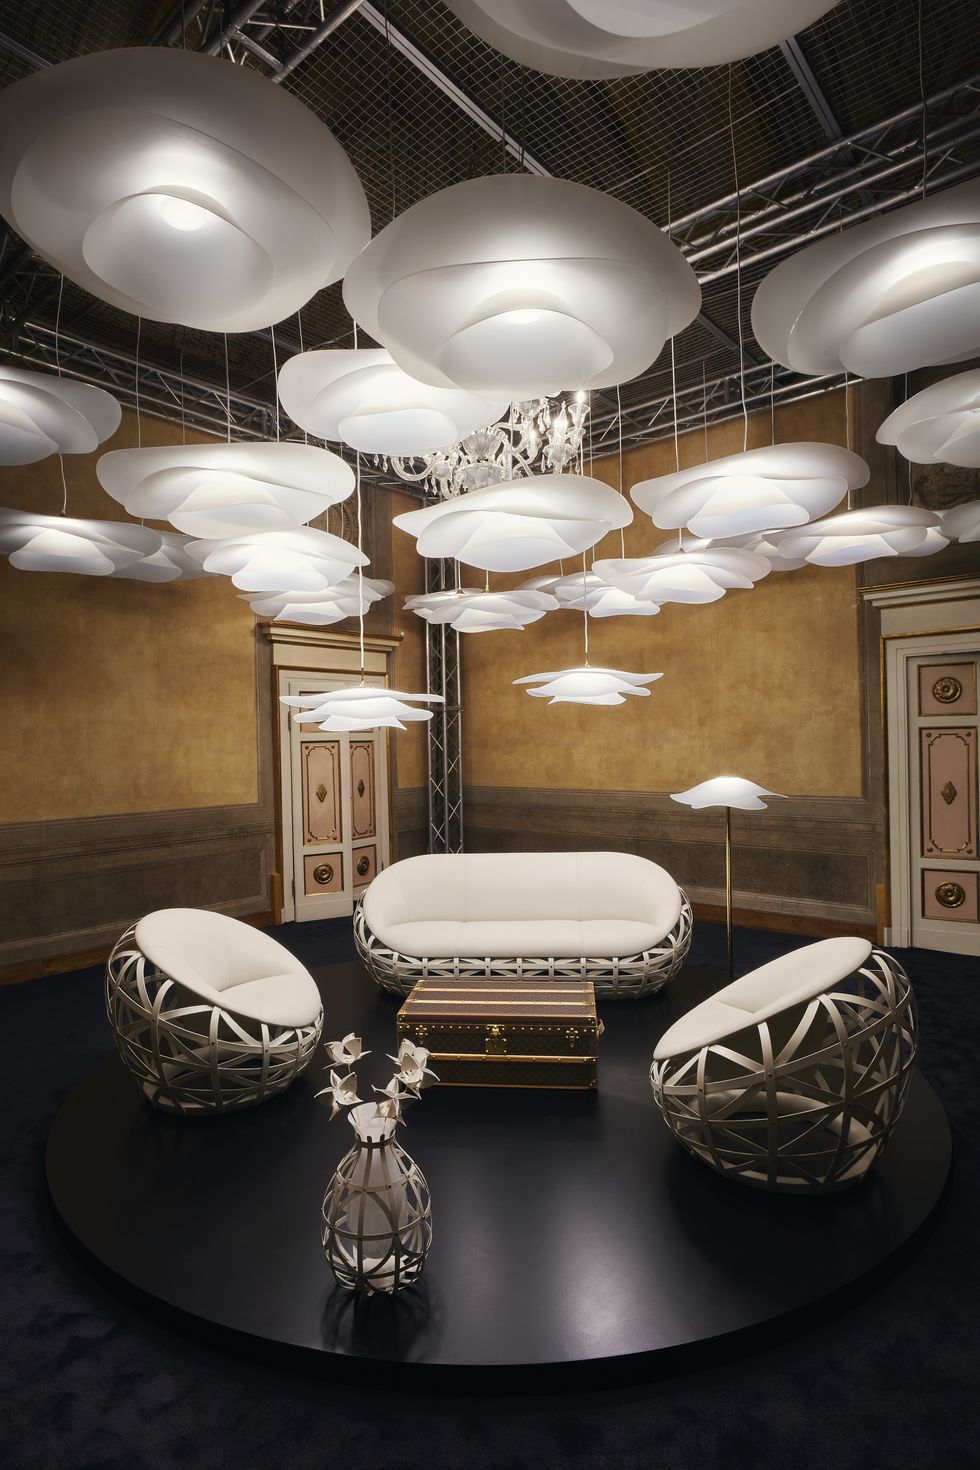 From fashion to furniture: Here are the highlights of Milan Design